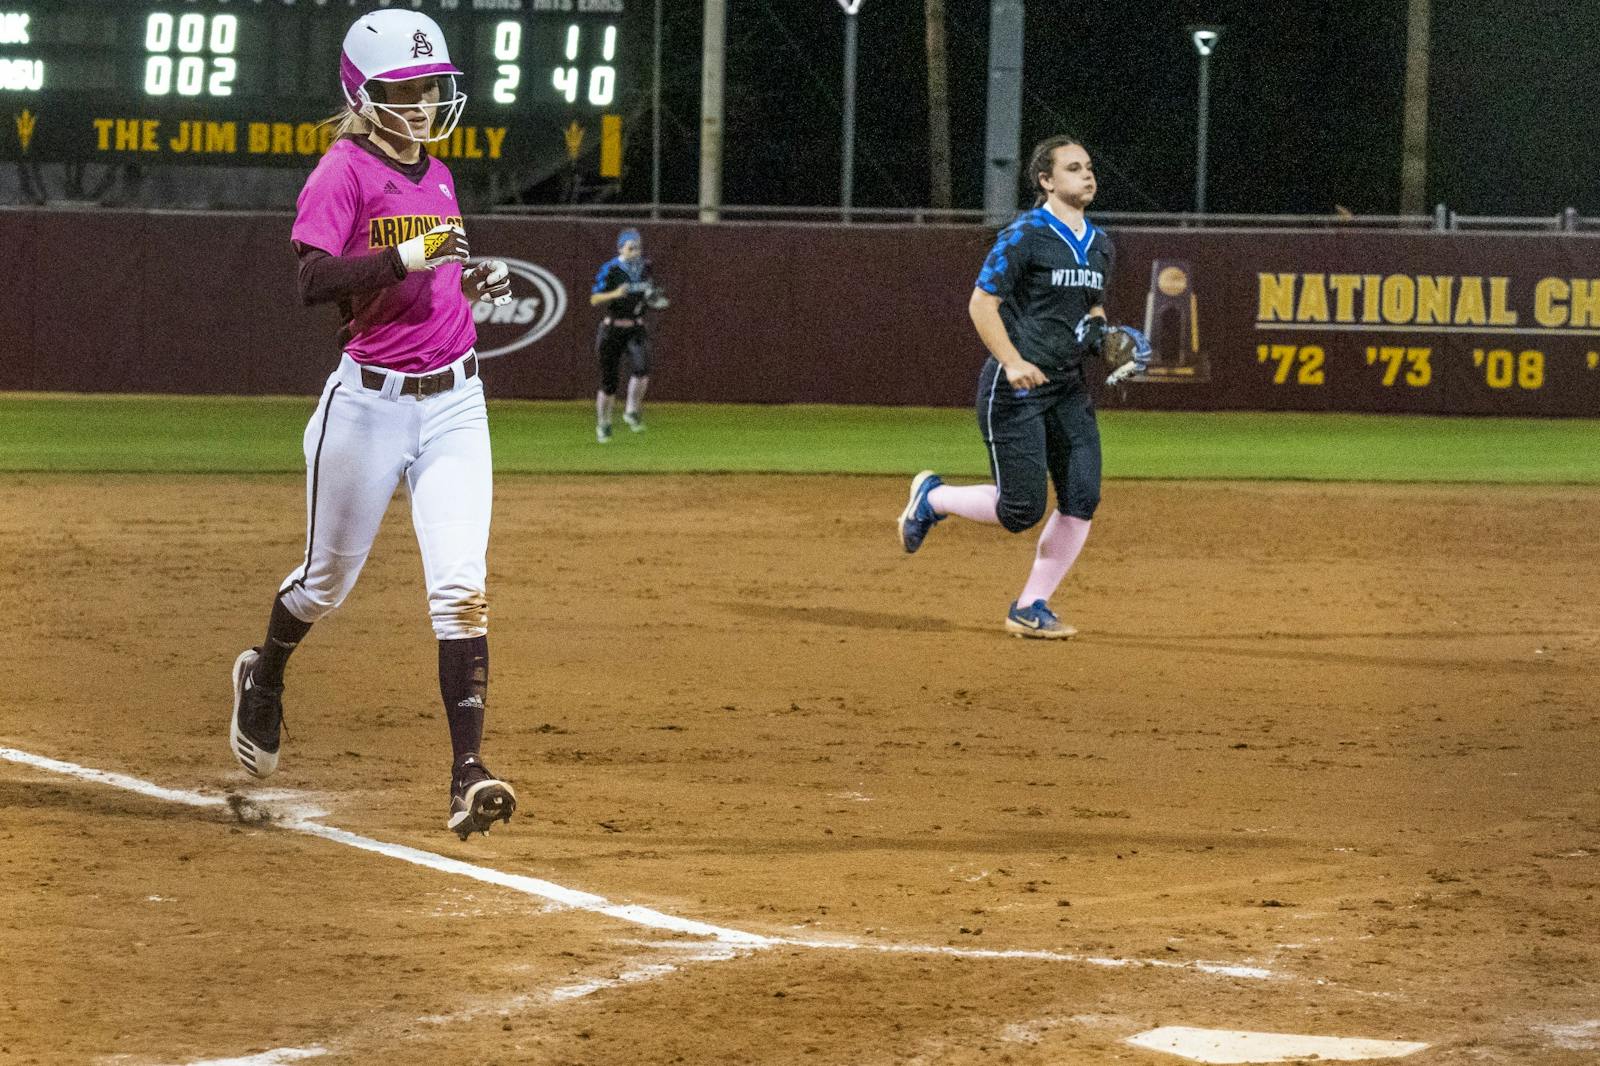 ASU softball sweeps doubleheader in comeback fashion at Littlewood